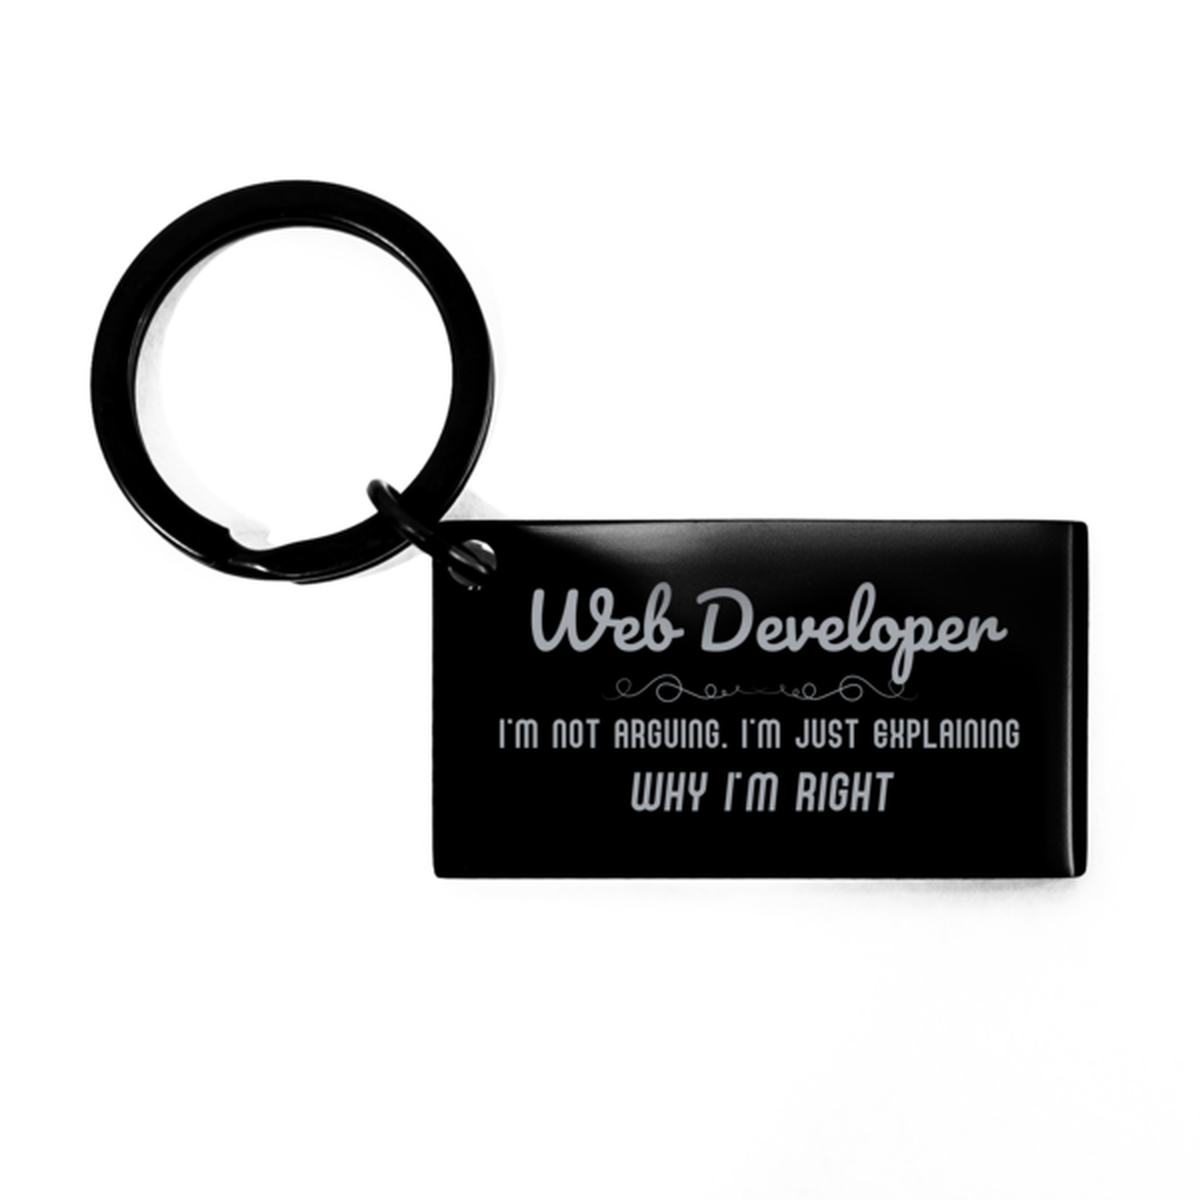 Web Developer I'm not Arguing. I'm Just Explaining Why I'm RIGHT Keychain, Funny Saying Quote Web Developer Gifts For Web Developer Graduation Birthday Christmas Gifts for Men Women Coworker